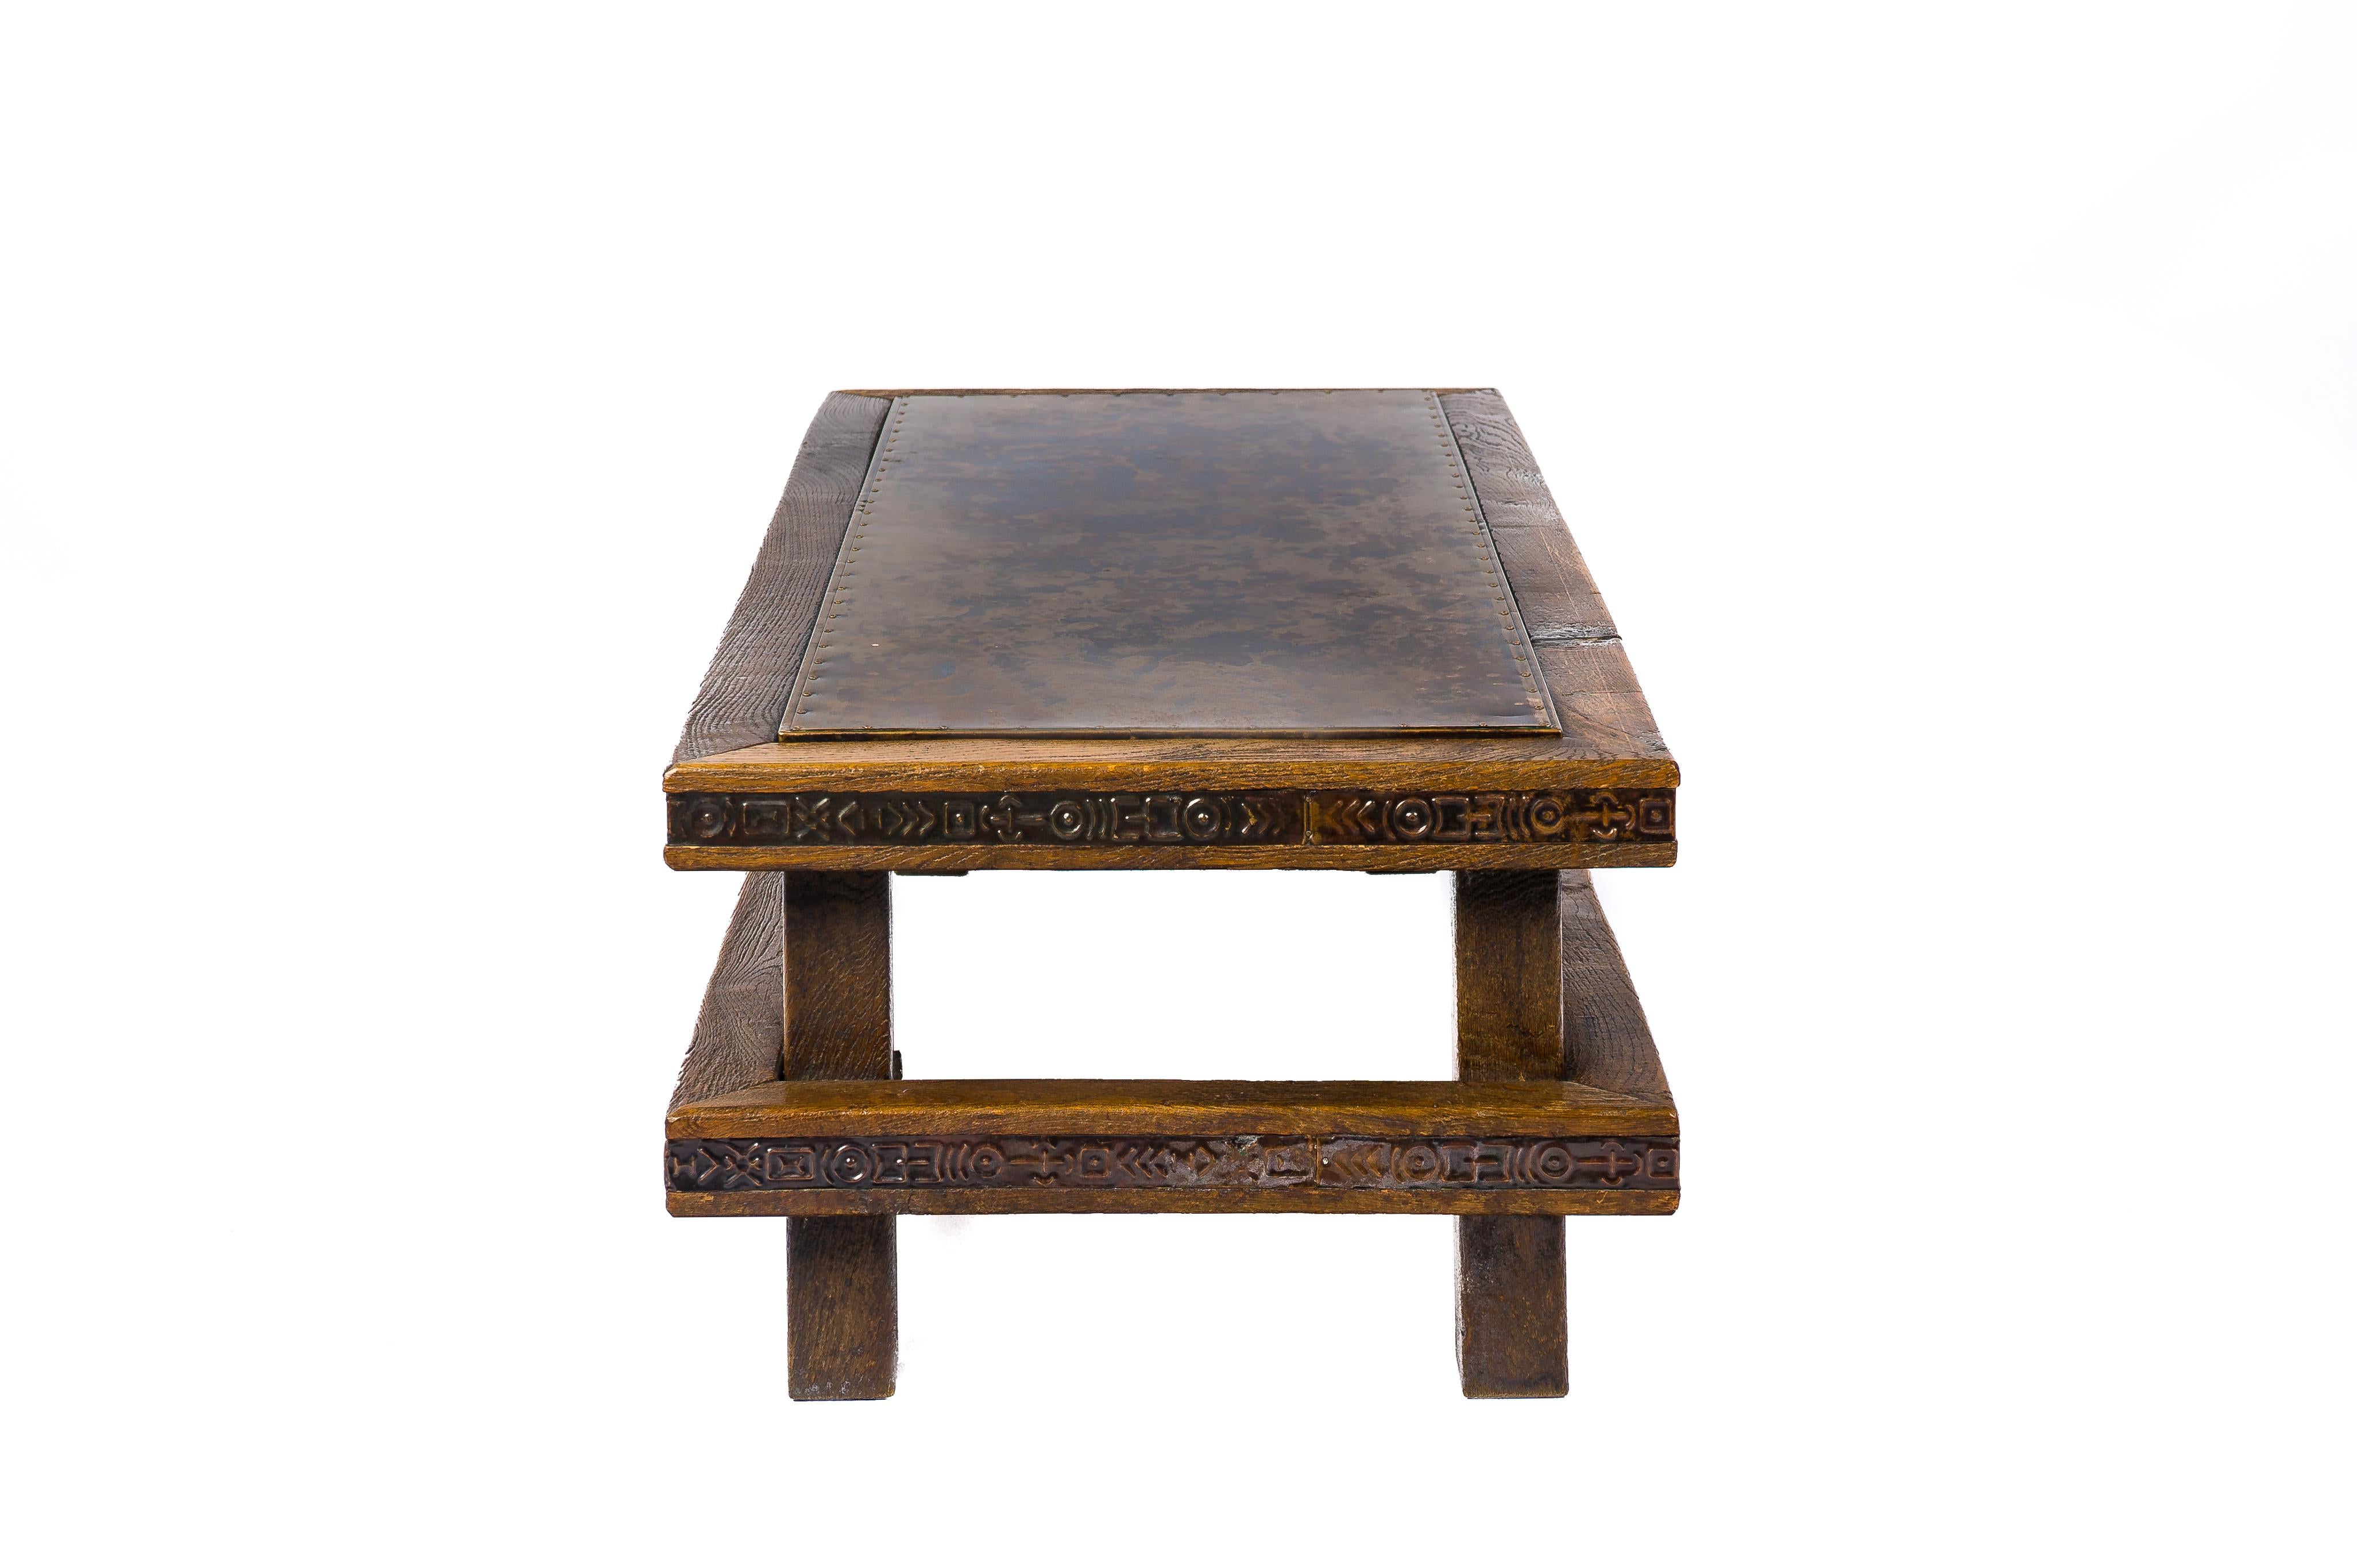 Midcentury Solid Oak Brutalist Dutch Coffee Table with Copper Top and Inlay For Sale 1